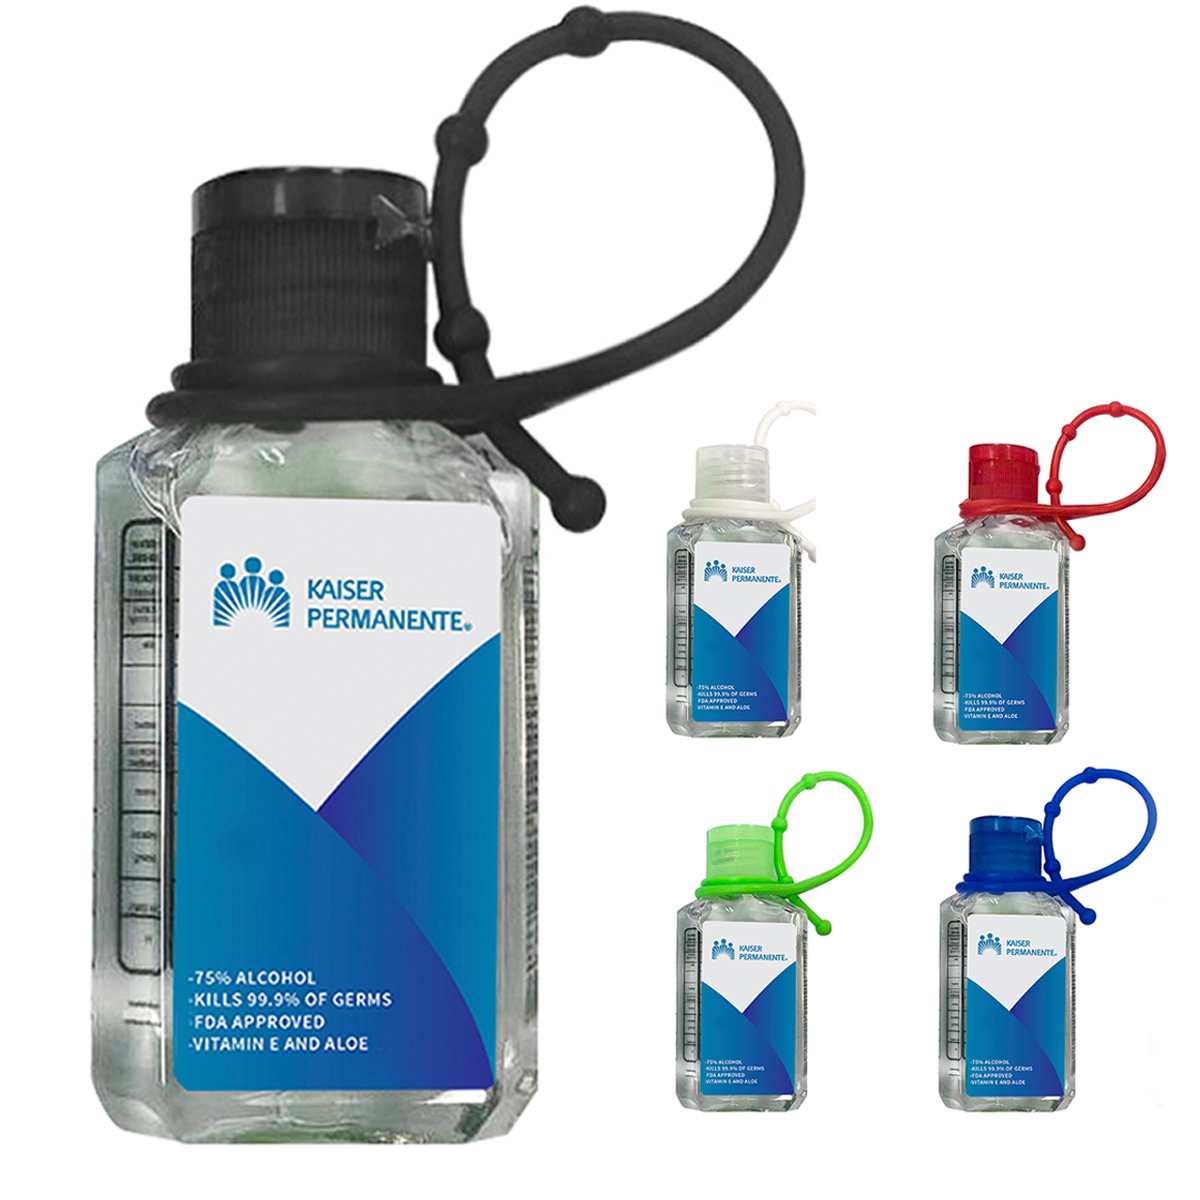 2.0 OZ HAND SANITIZER WITH SILICONE LOOP